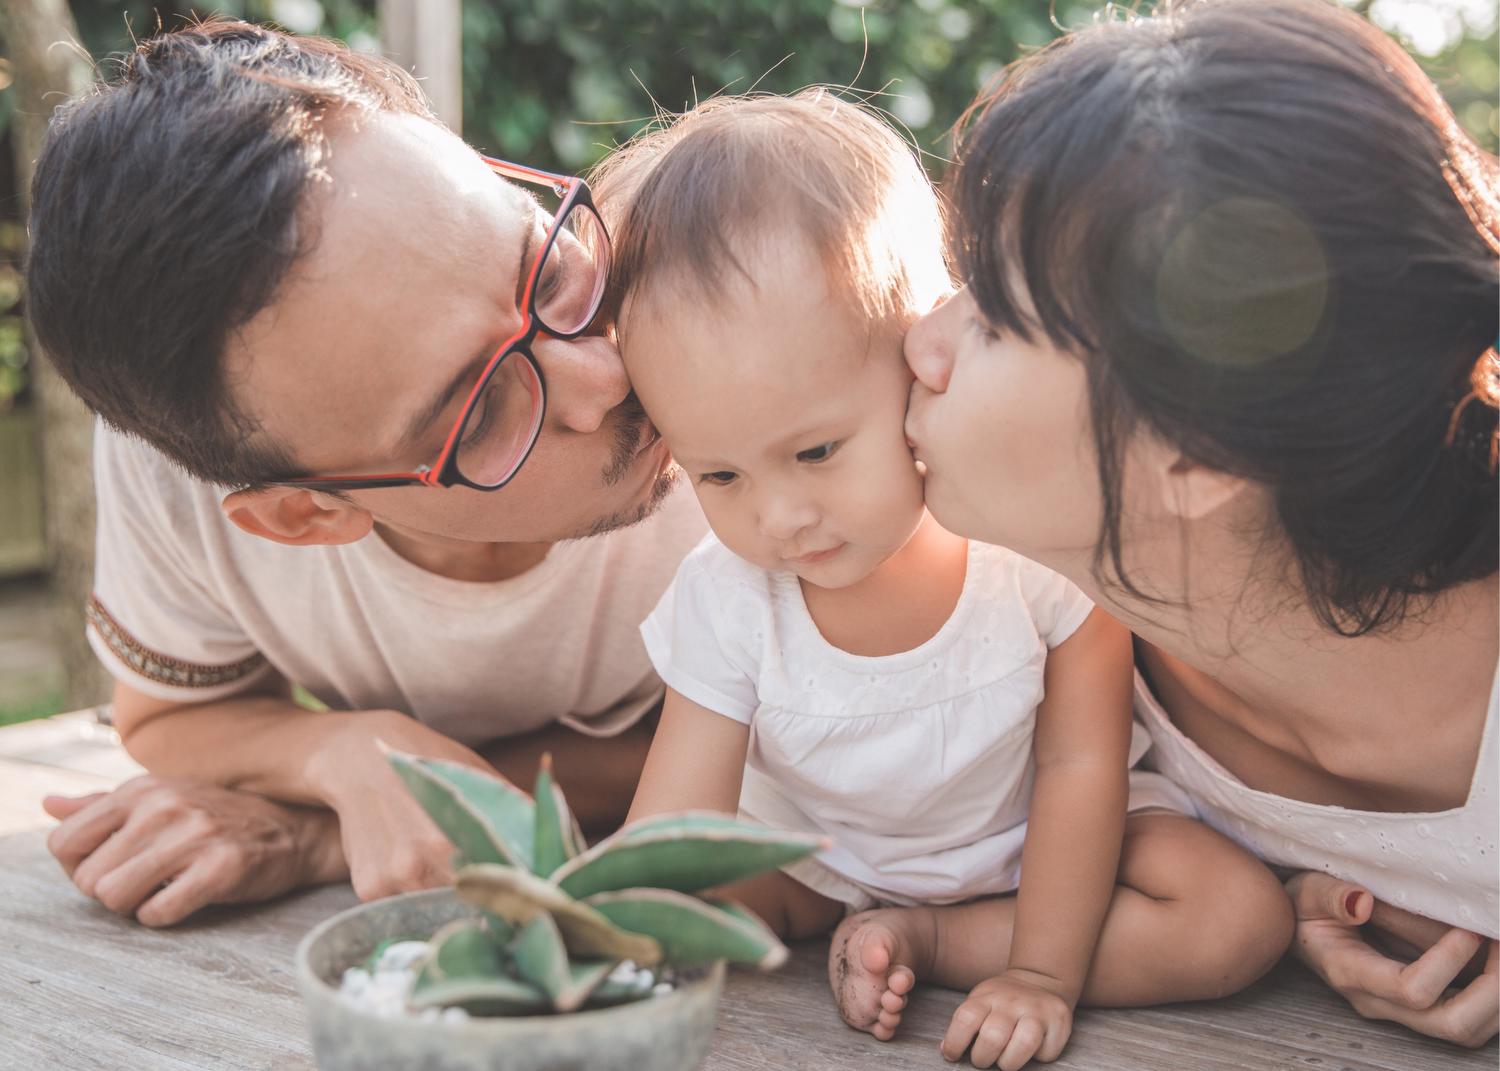 Small child looking at a plant, between a man wearing glasses and woman who are both leaned over kissing the child's cheeks